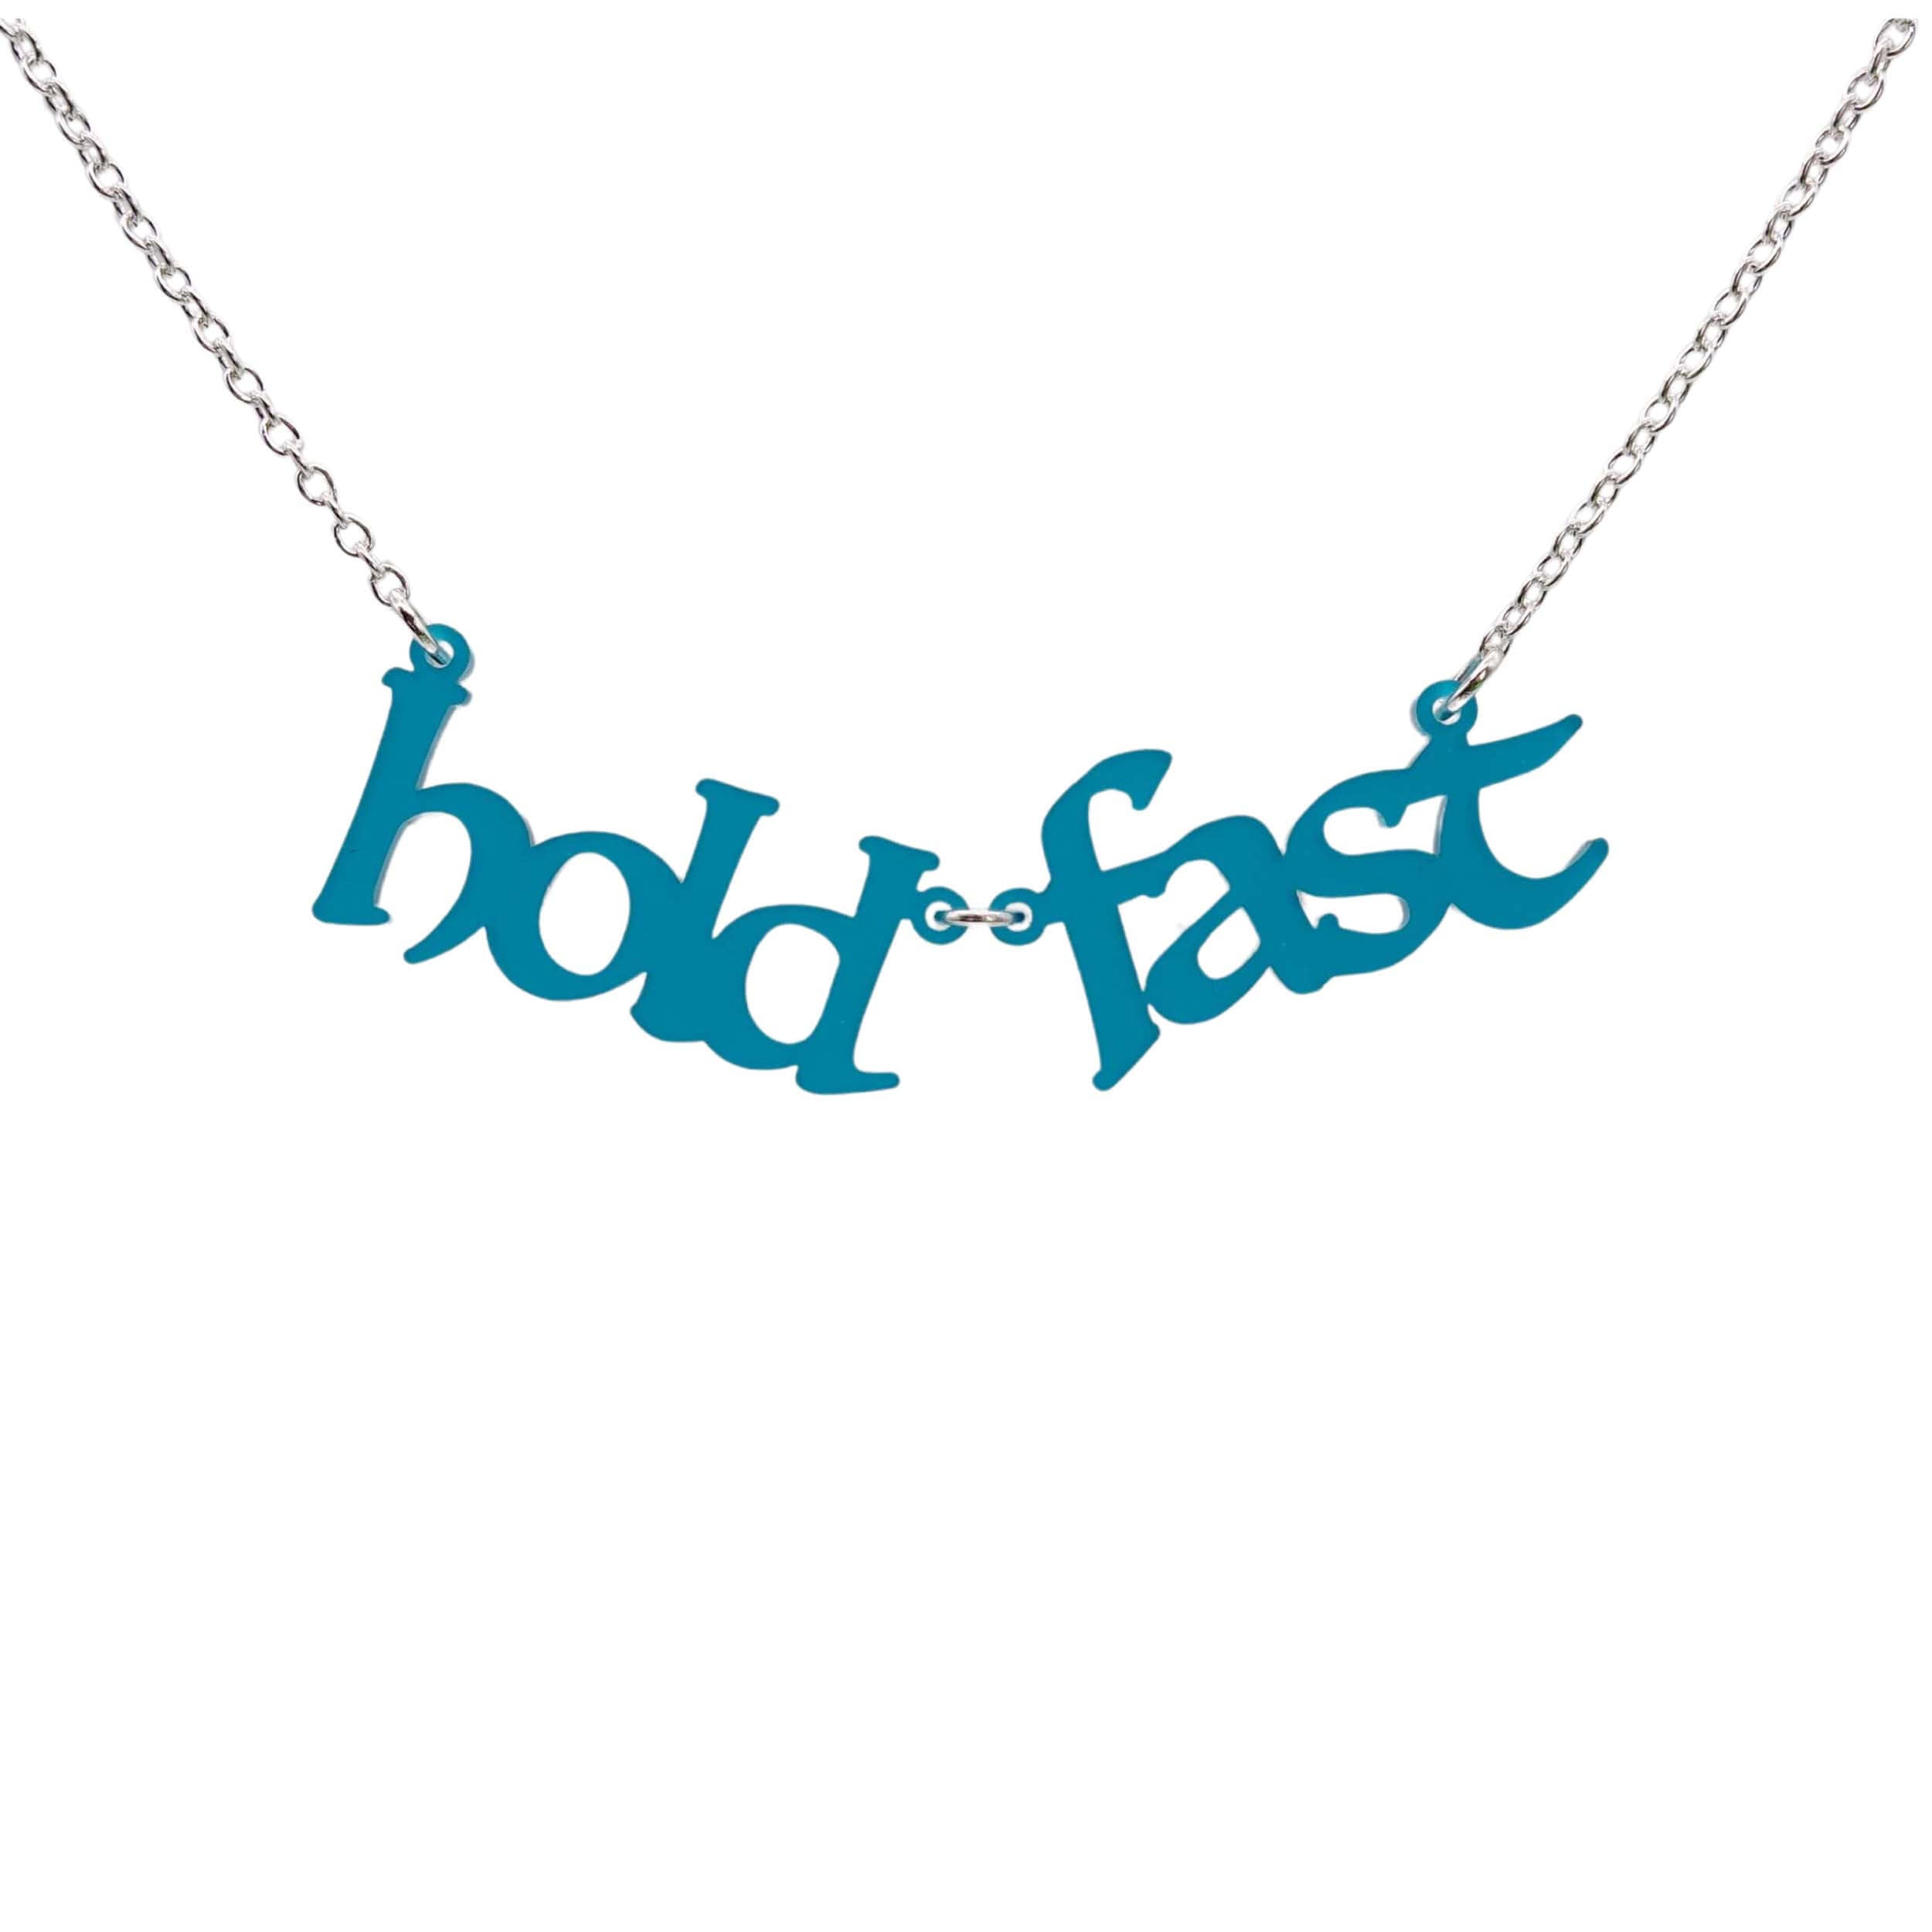 Hold fast necklace in teal frost shown hanging against a white background. 